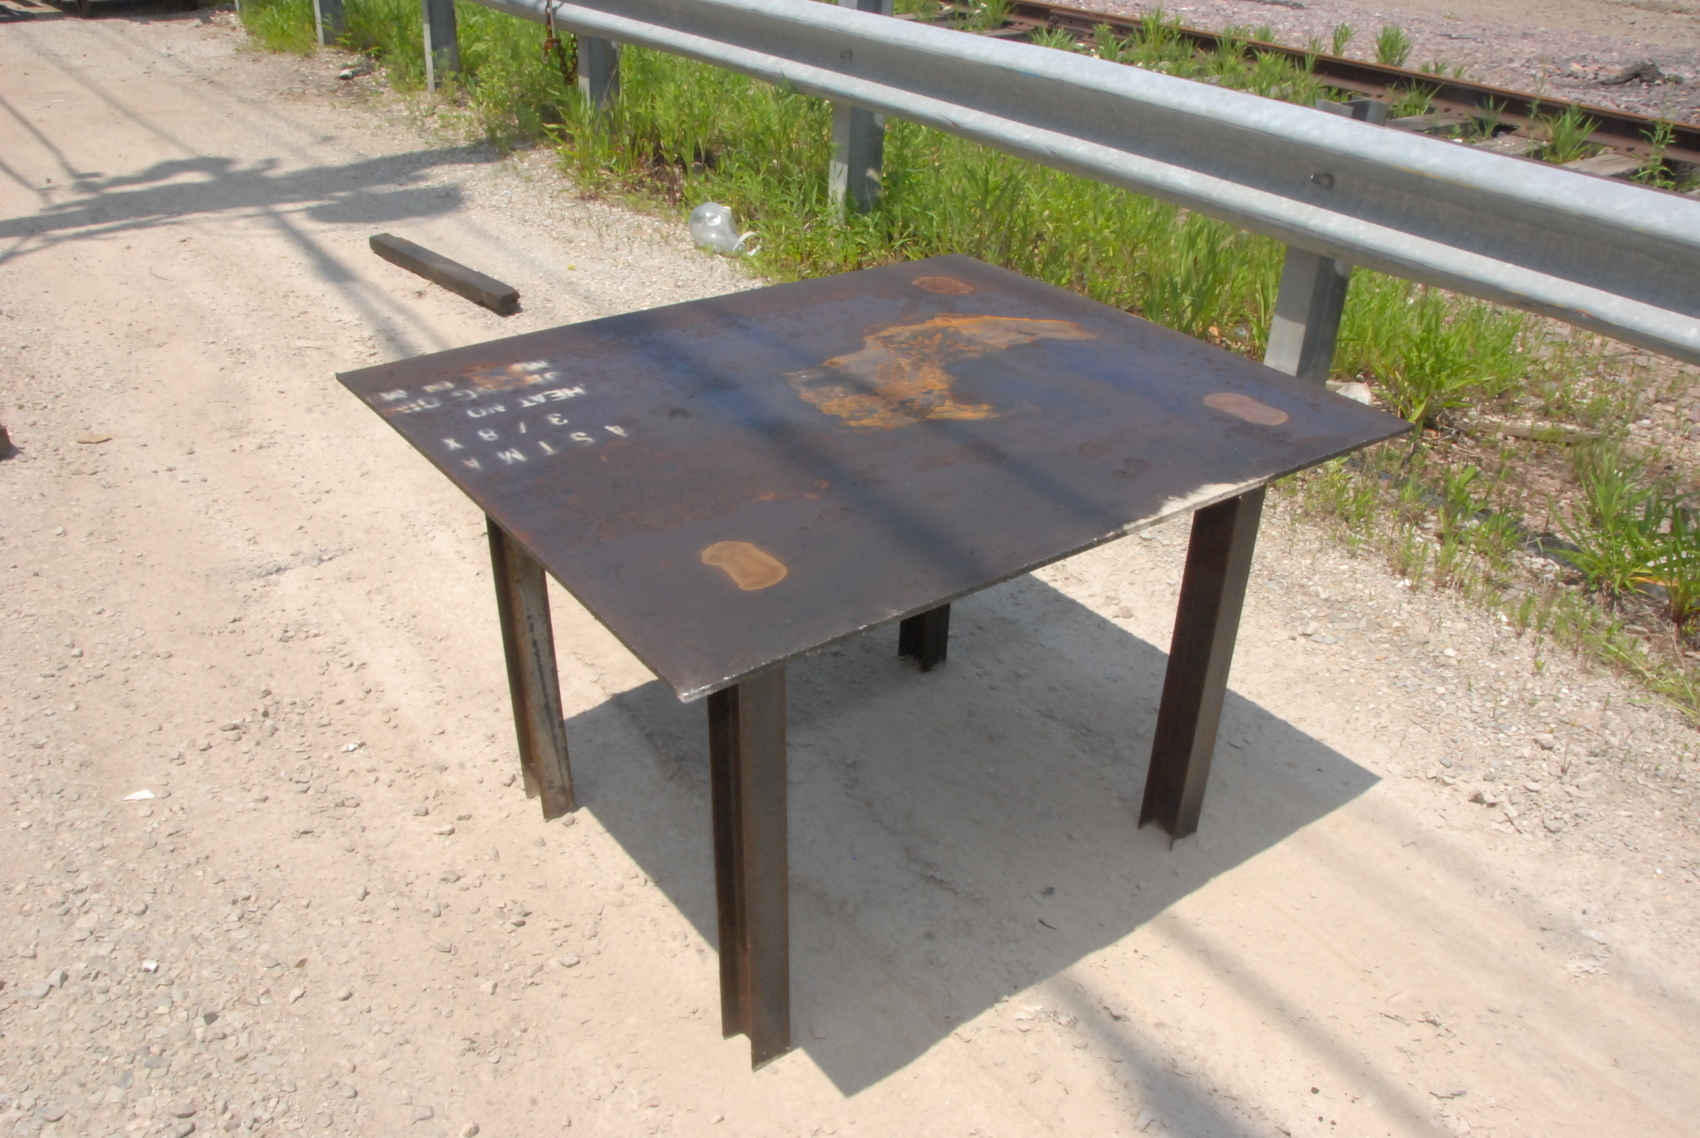 Welding table 48*40 1/2*30,3/8"thick nopl